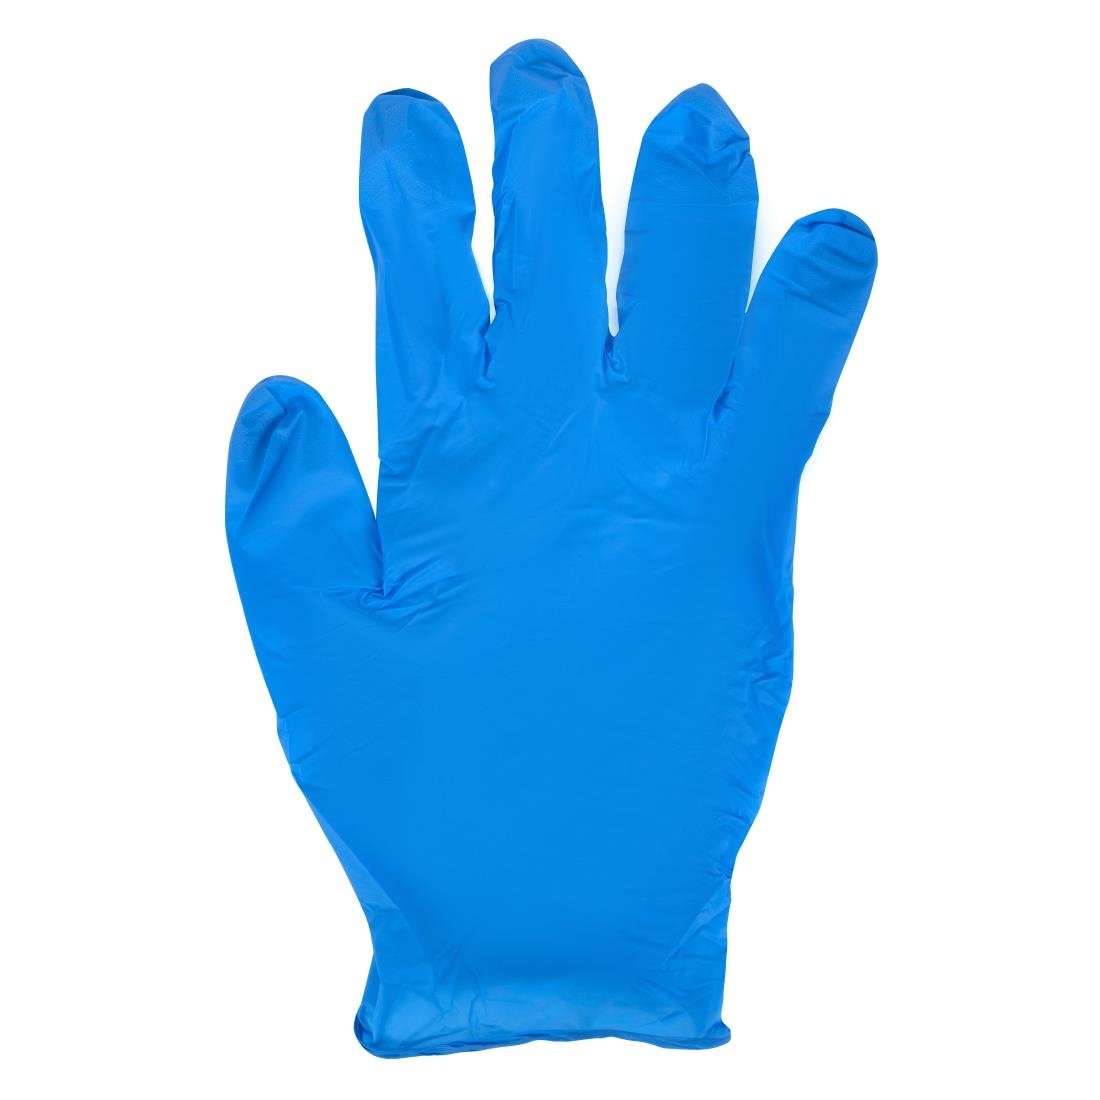 Y478-S Powder-Free Nitrile Gloves S (Pack of 100)